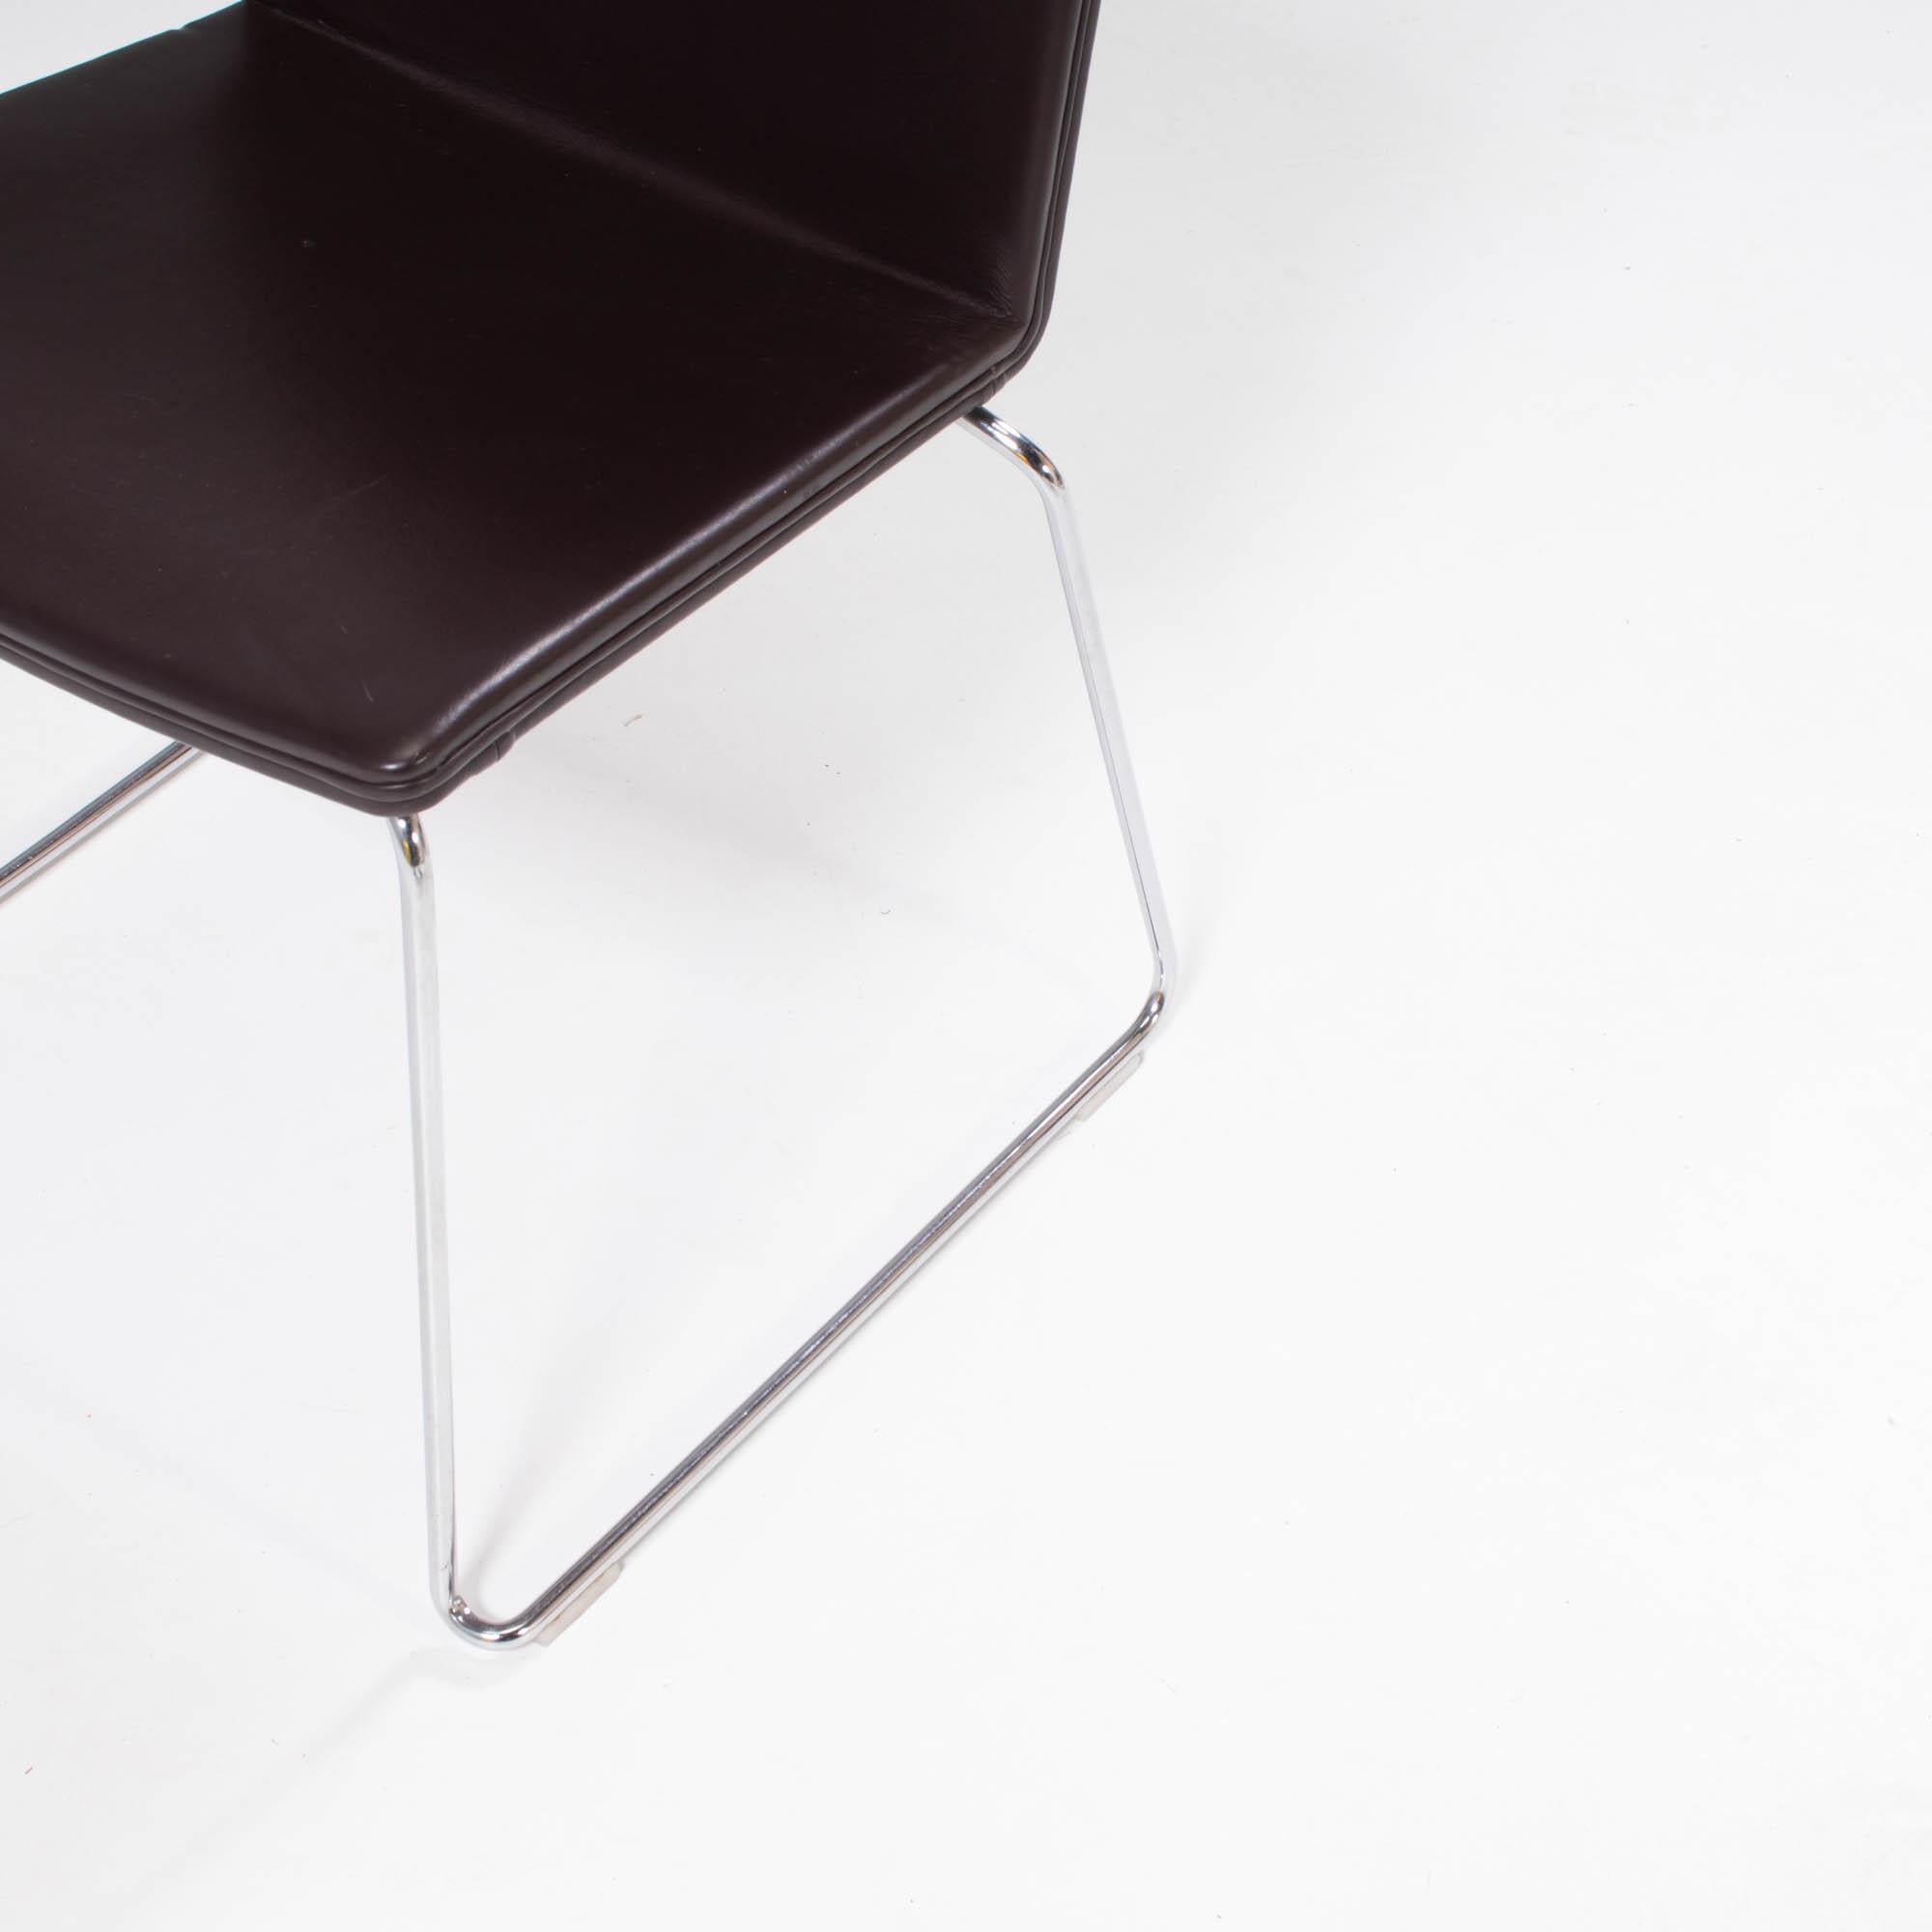 Contemporary Poliform by Mario Mazzer Nex Brown Leather Dining Chair